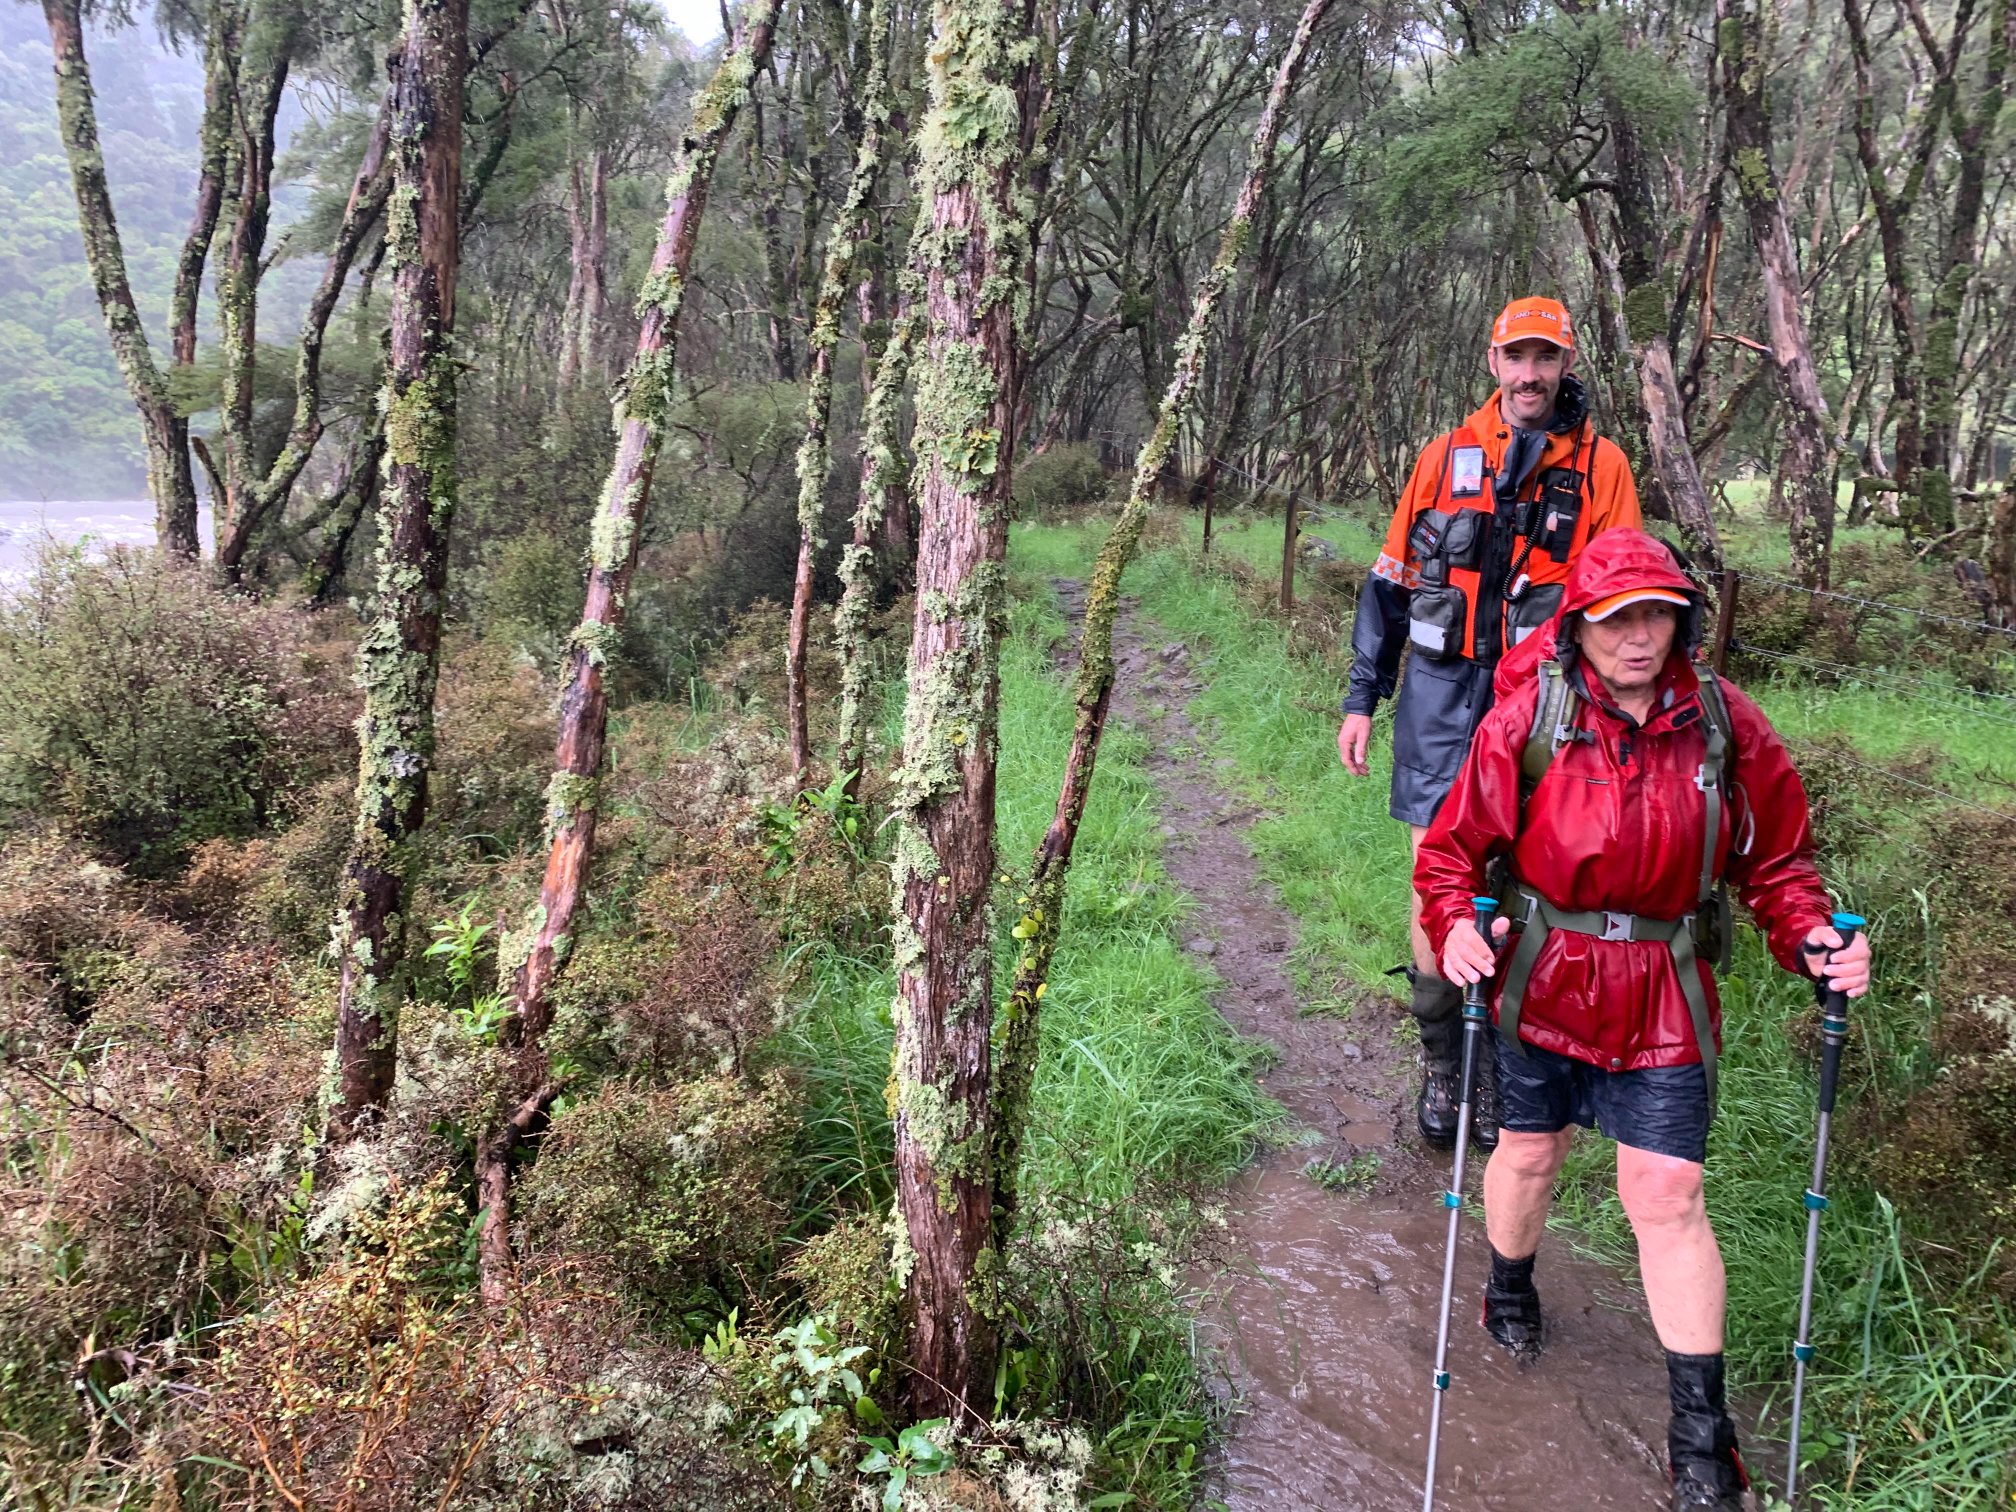 A woman and a man wearing rain jackets tramp along a track through the trees in the rain.